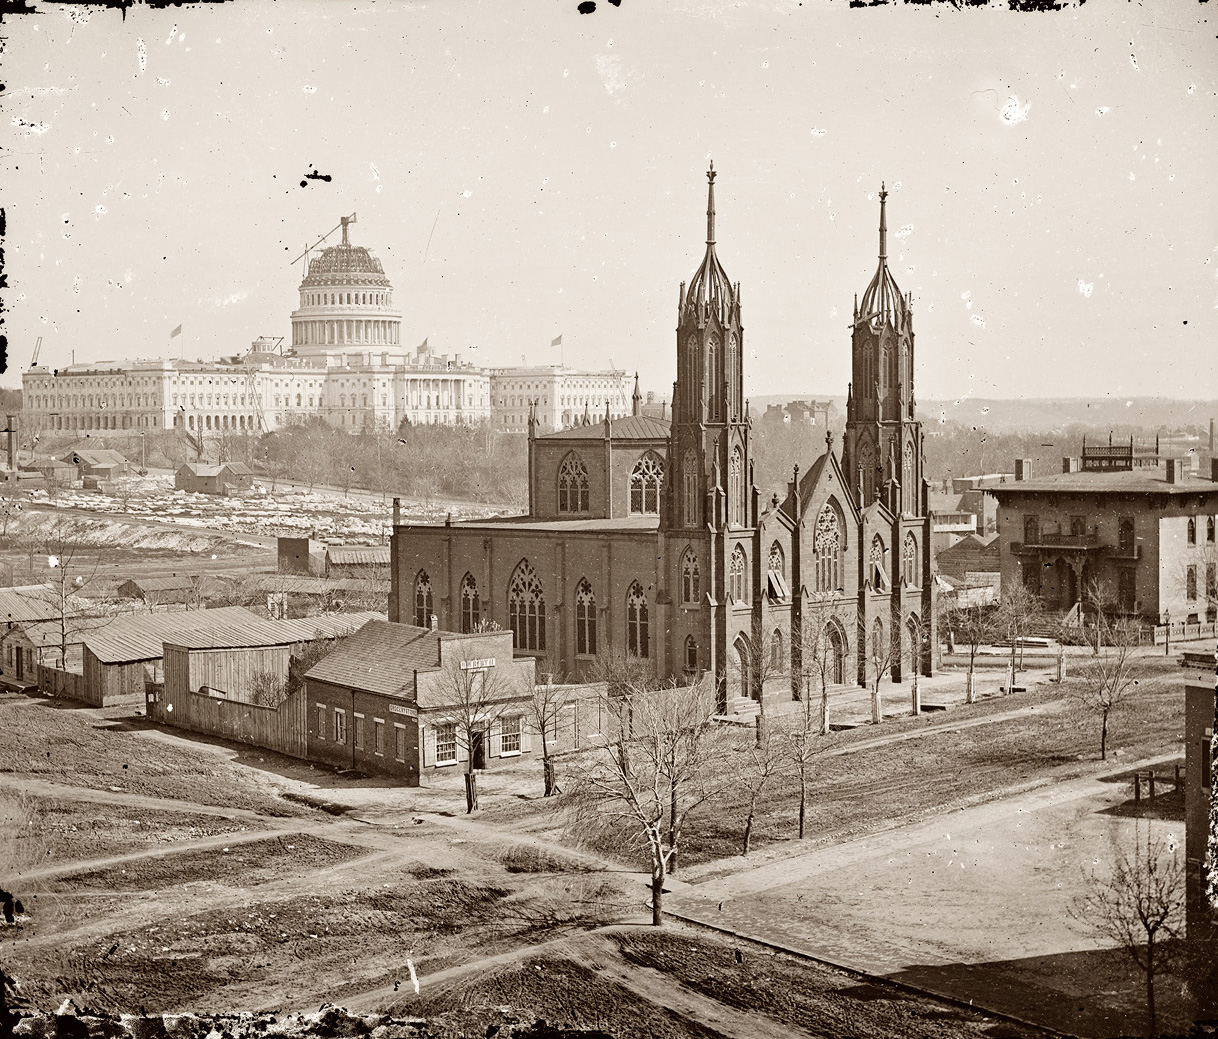 "Trinity Episcopal Church, 3rd & C & Ind. Ave." Unfinished Capitol in the background, circa 1863-64. View full size. Brady-Handy Collection.